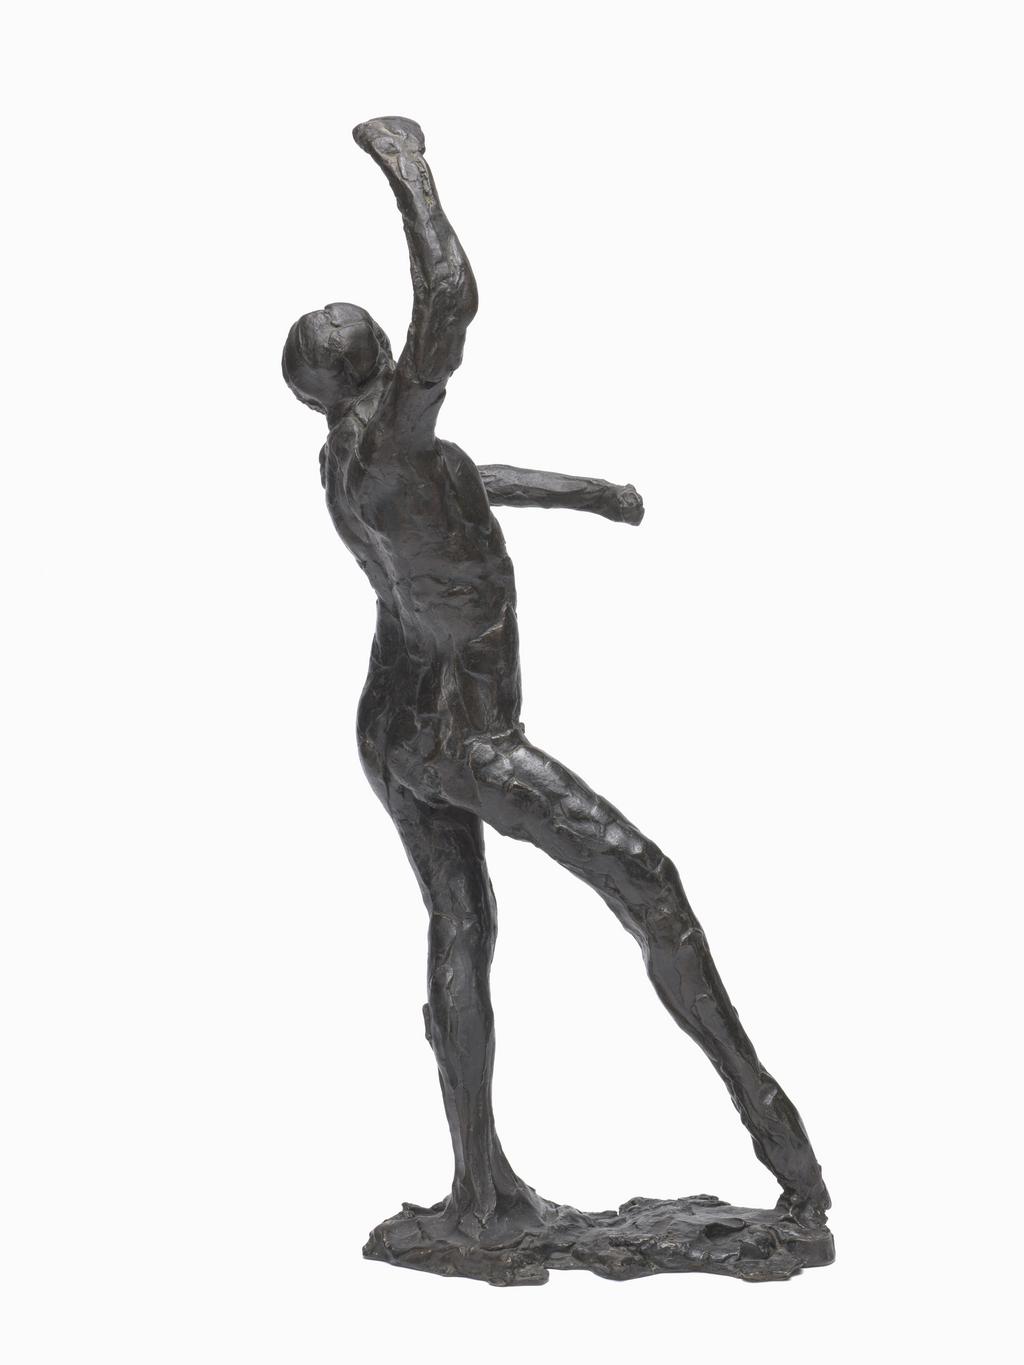 An image of Sculpture. Danse Espagnole. Degas, Edgar (French, 1834-1917). Hébrard, Adrien-A., bronze founder (French, 1865-1937). Copper alloy, probably bronze, cast. Cast after 1931 and before 1948.